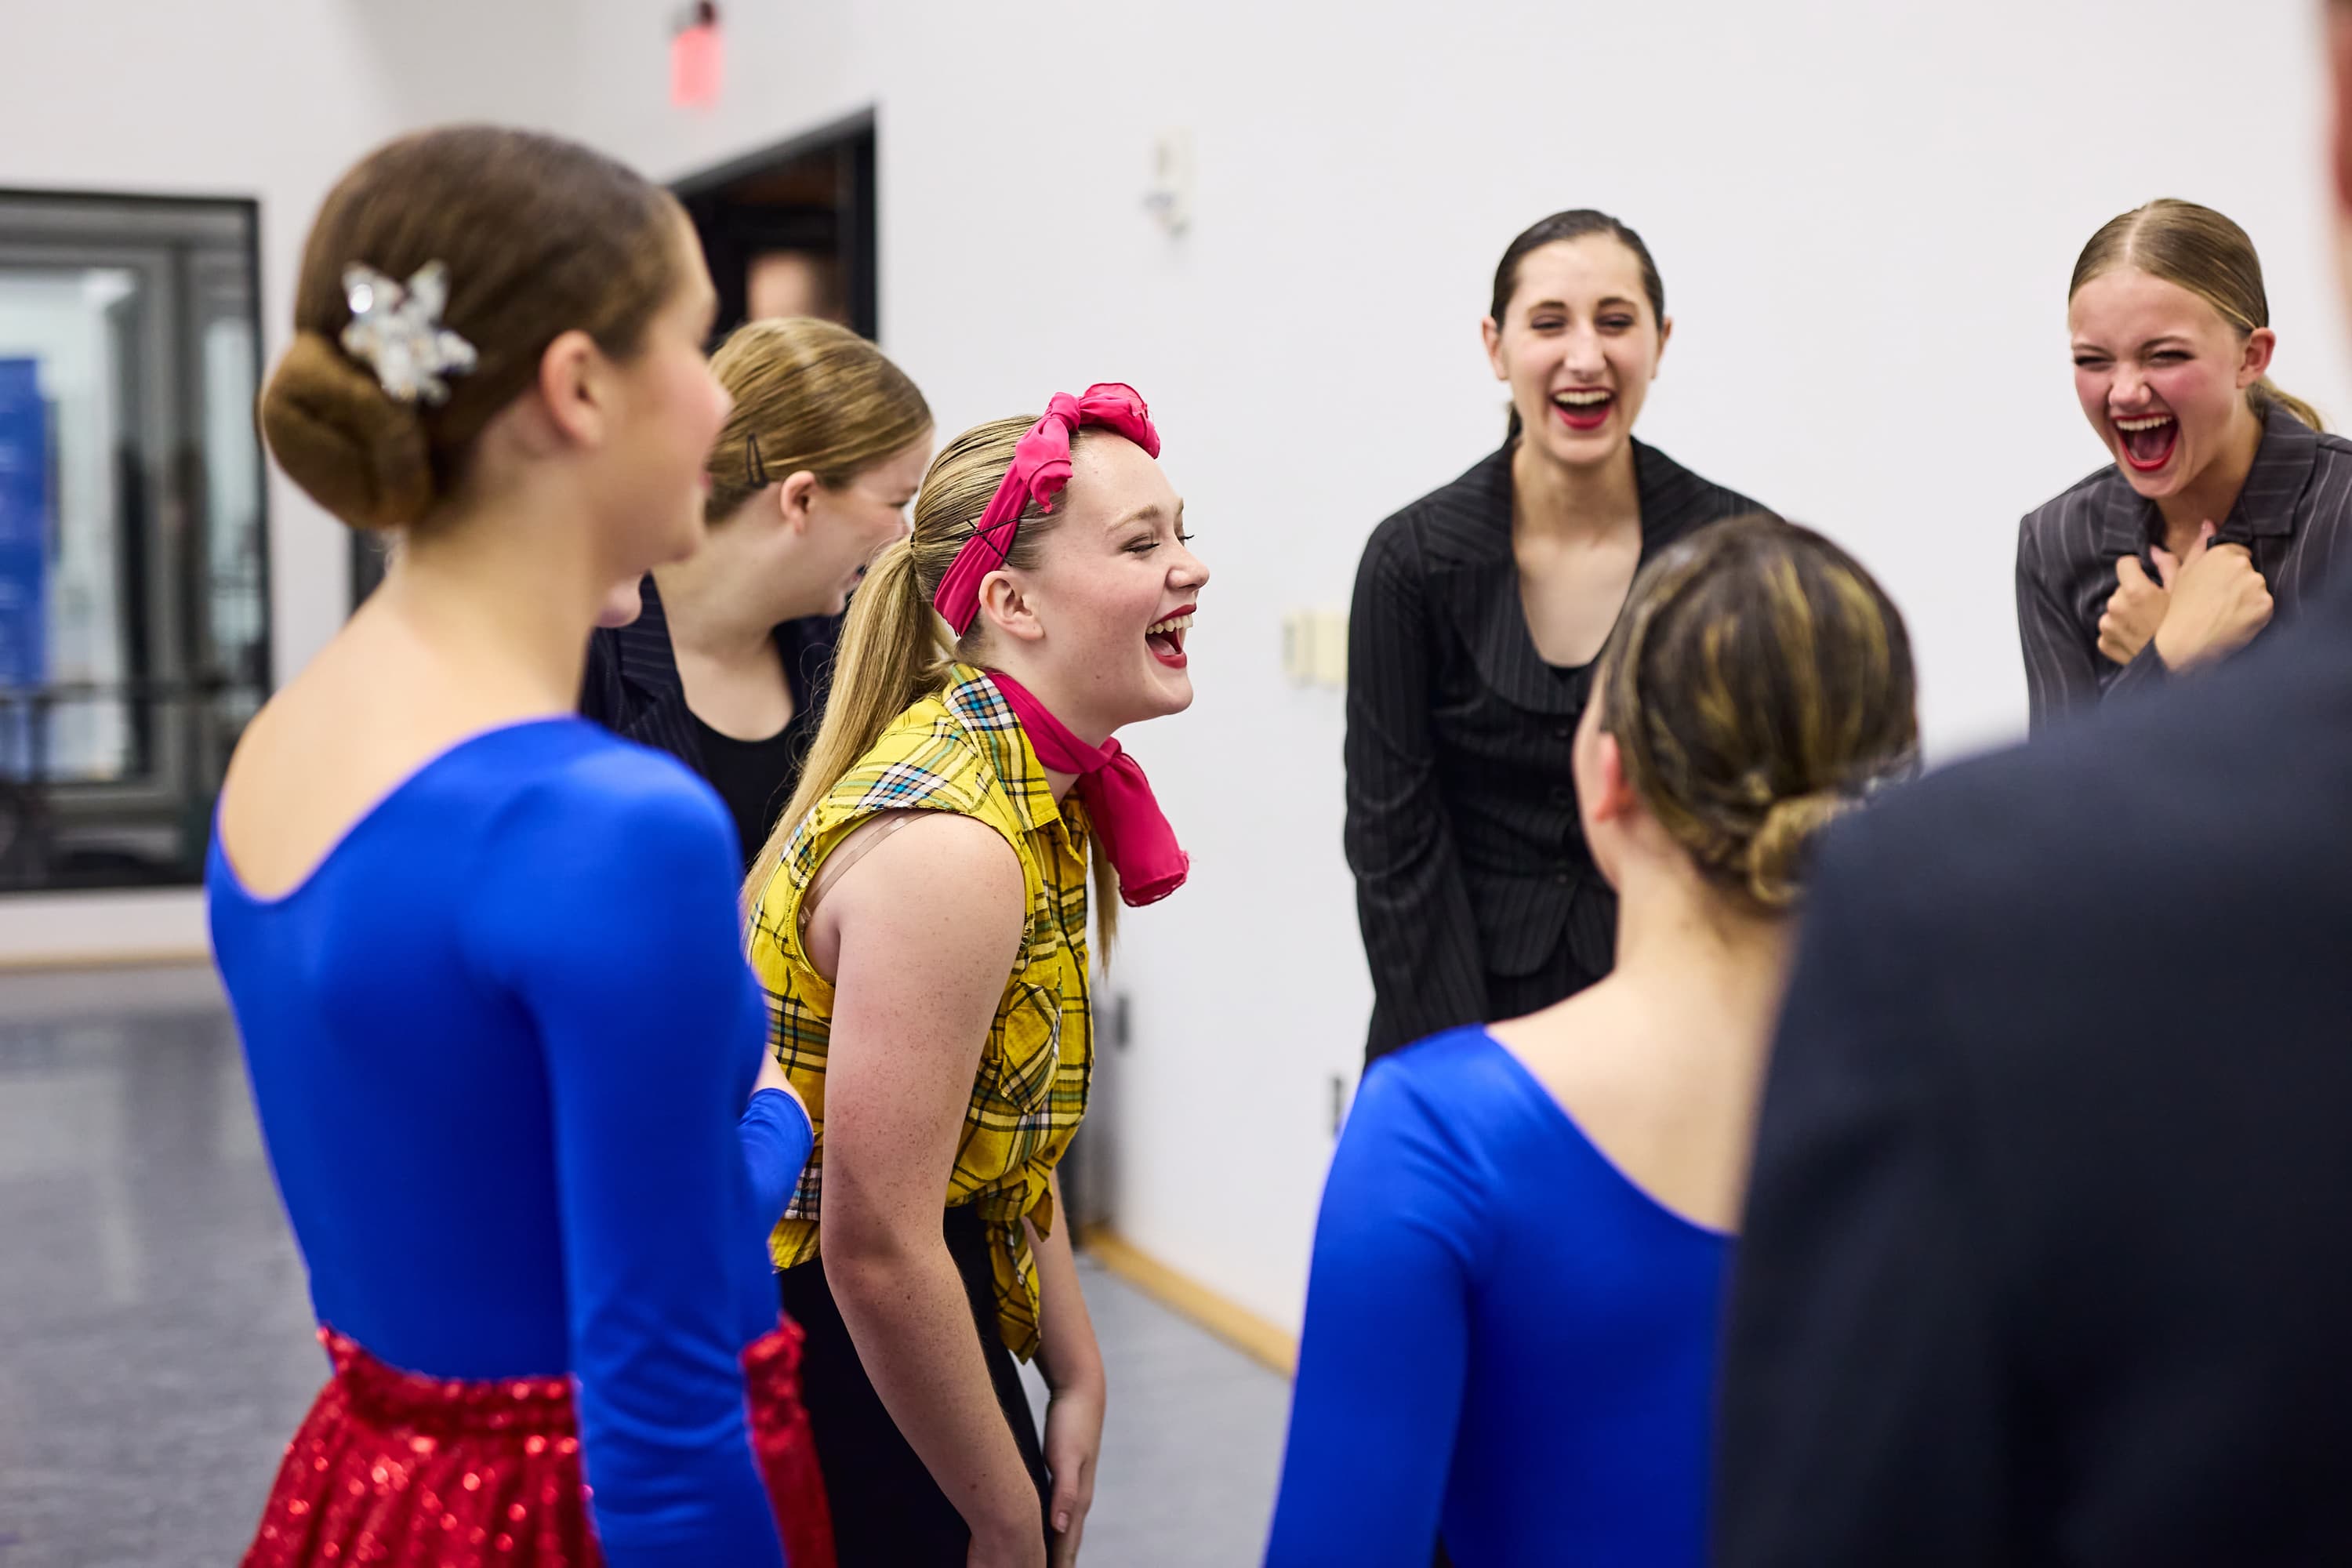 Students laughing with other students at rehearsal